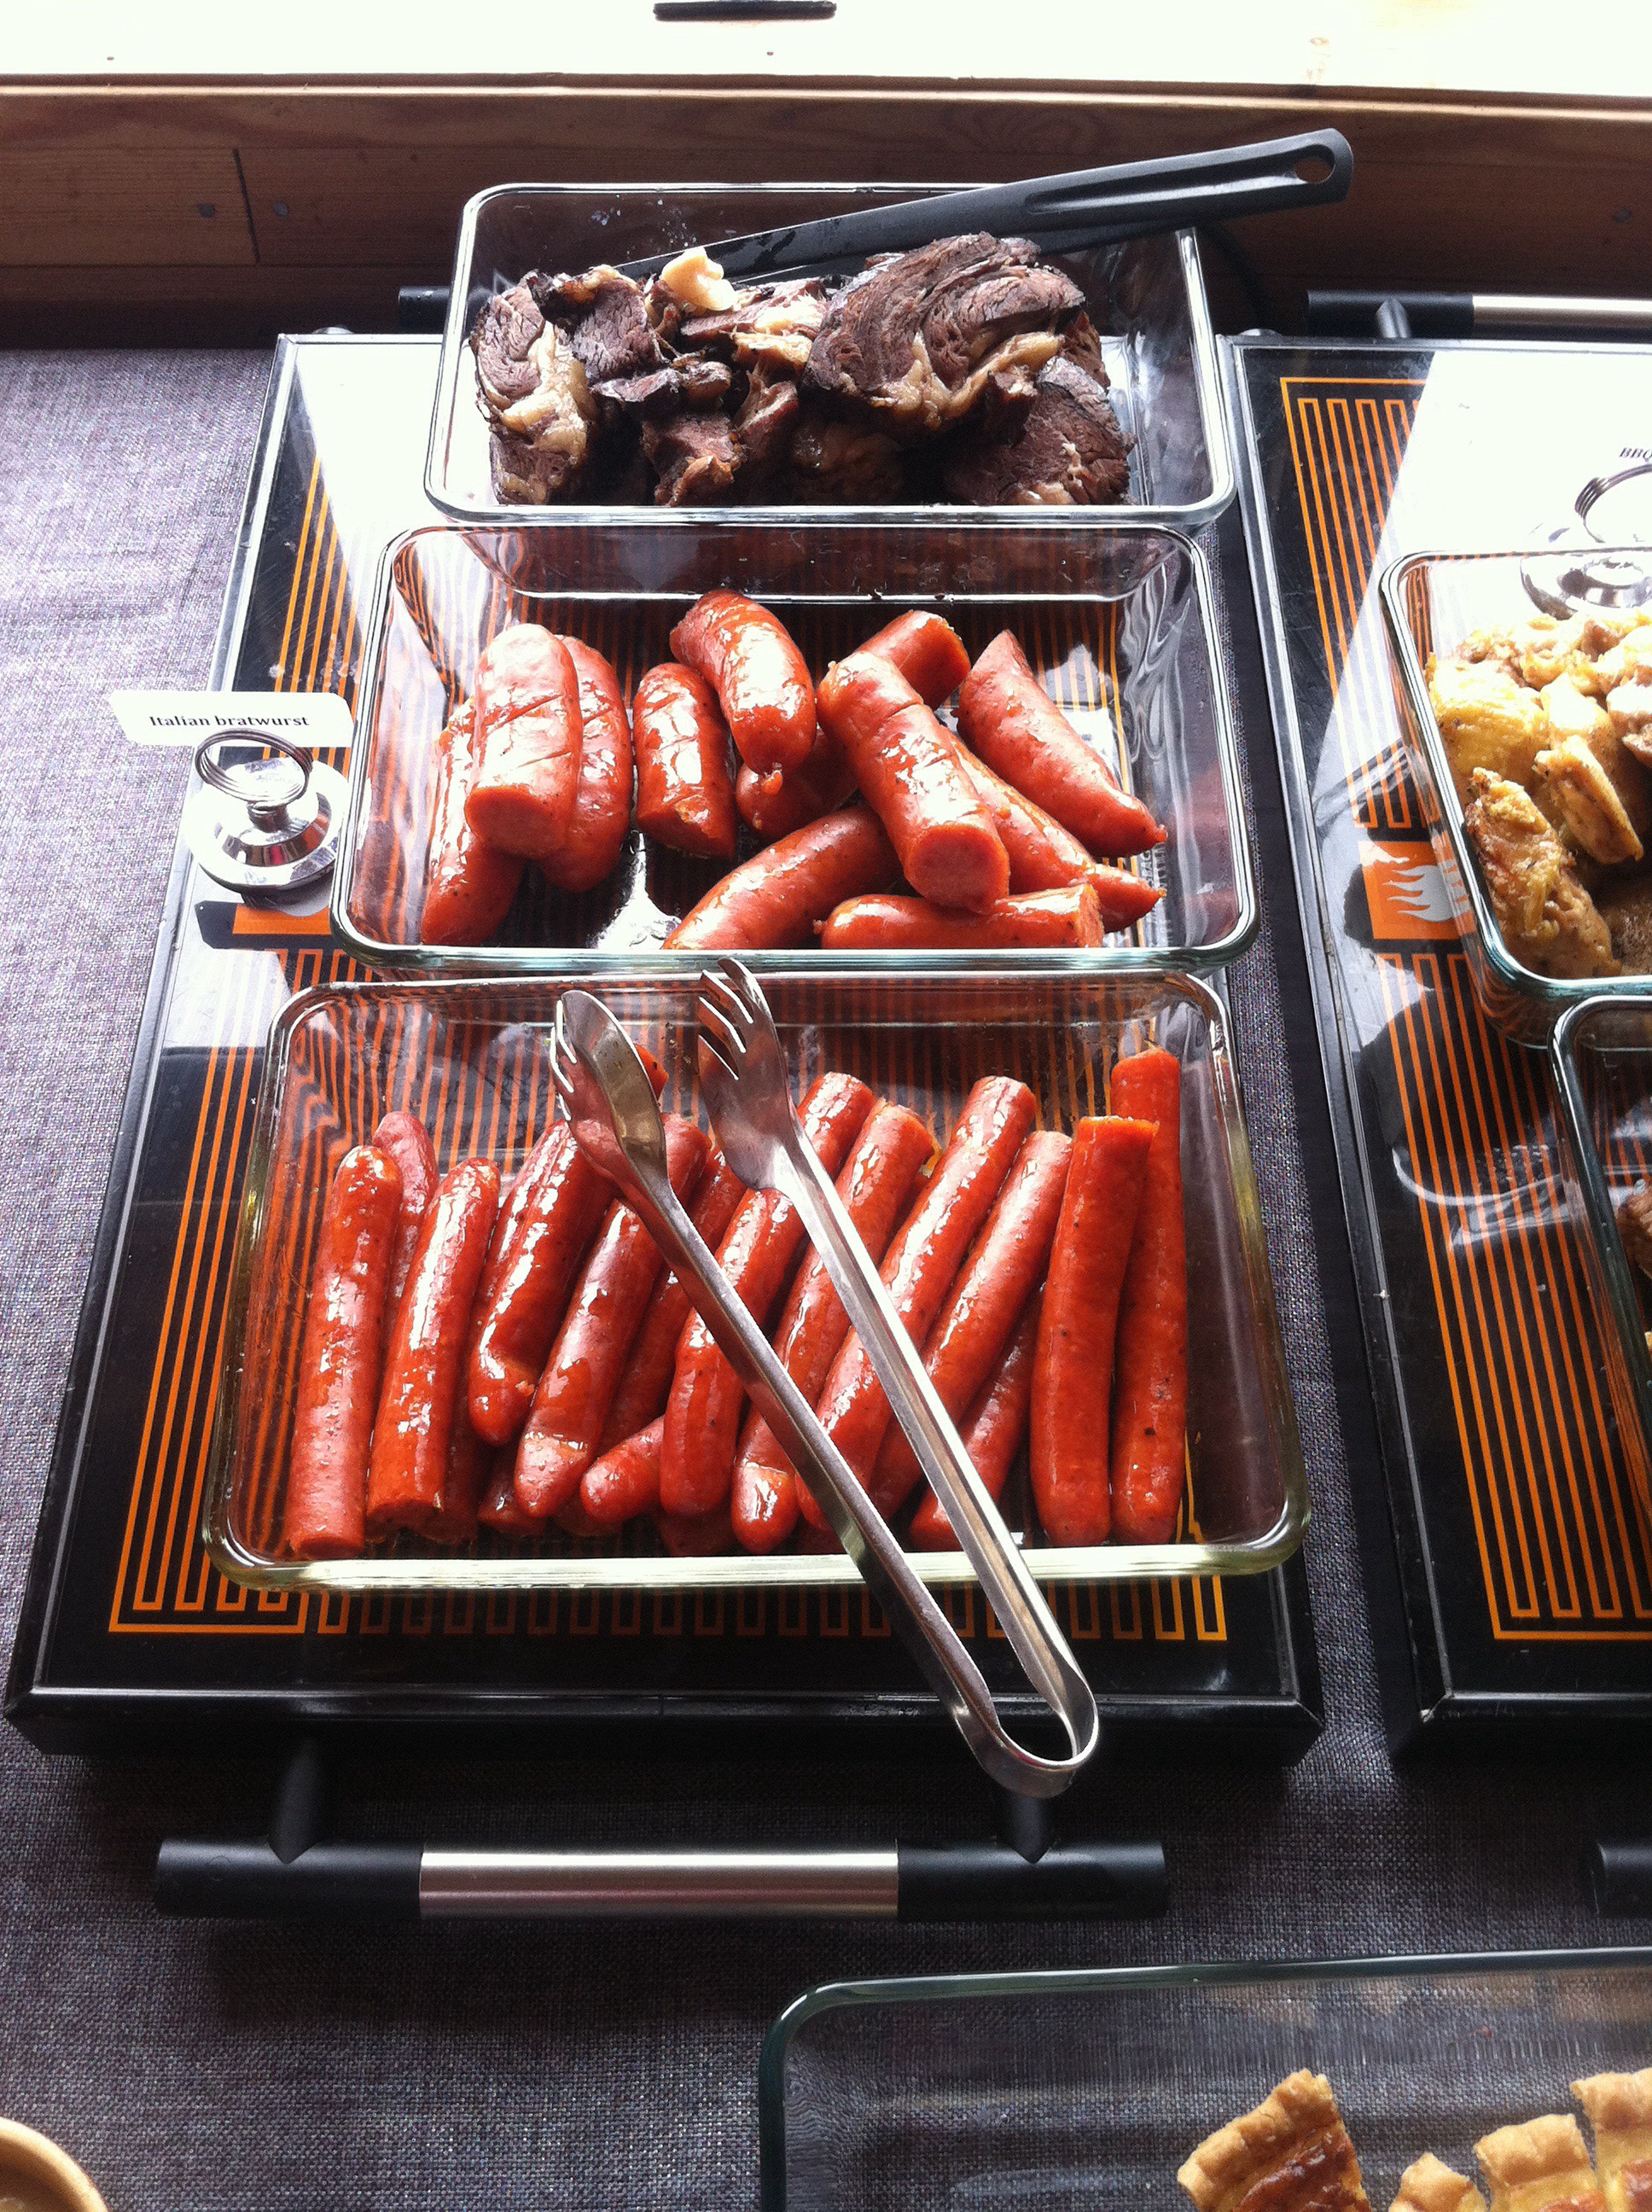 A selection of meats